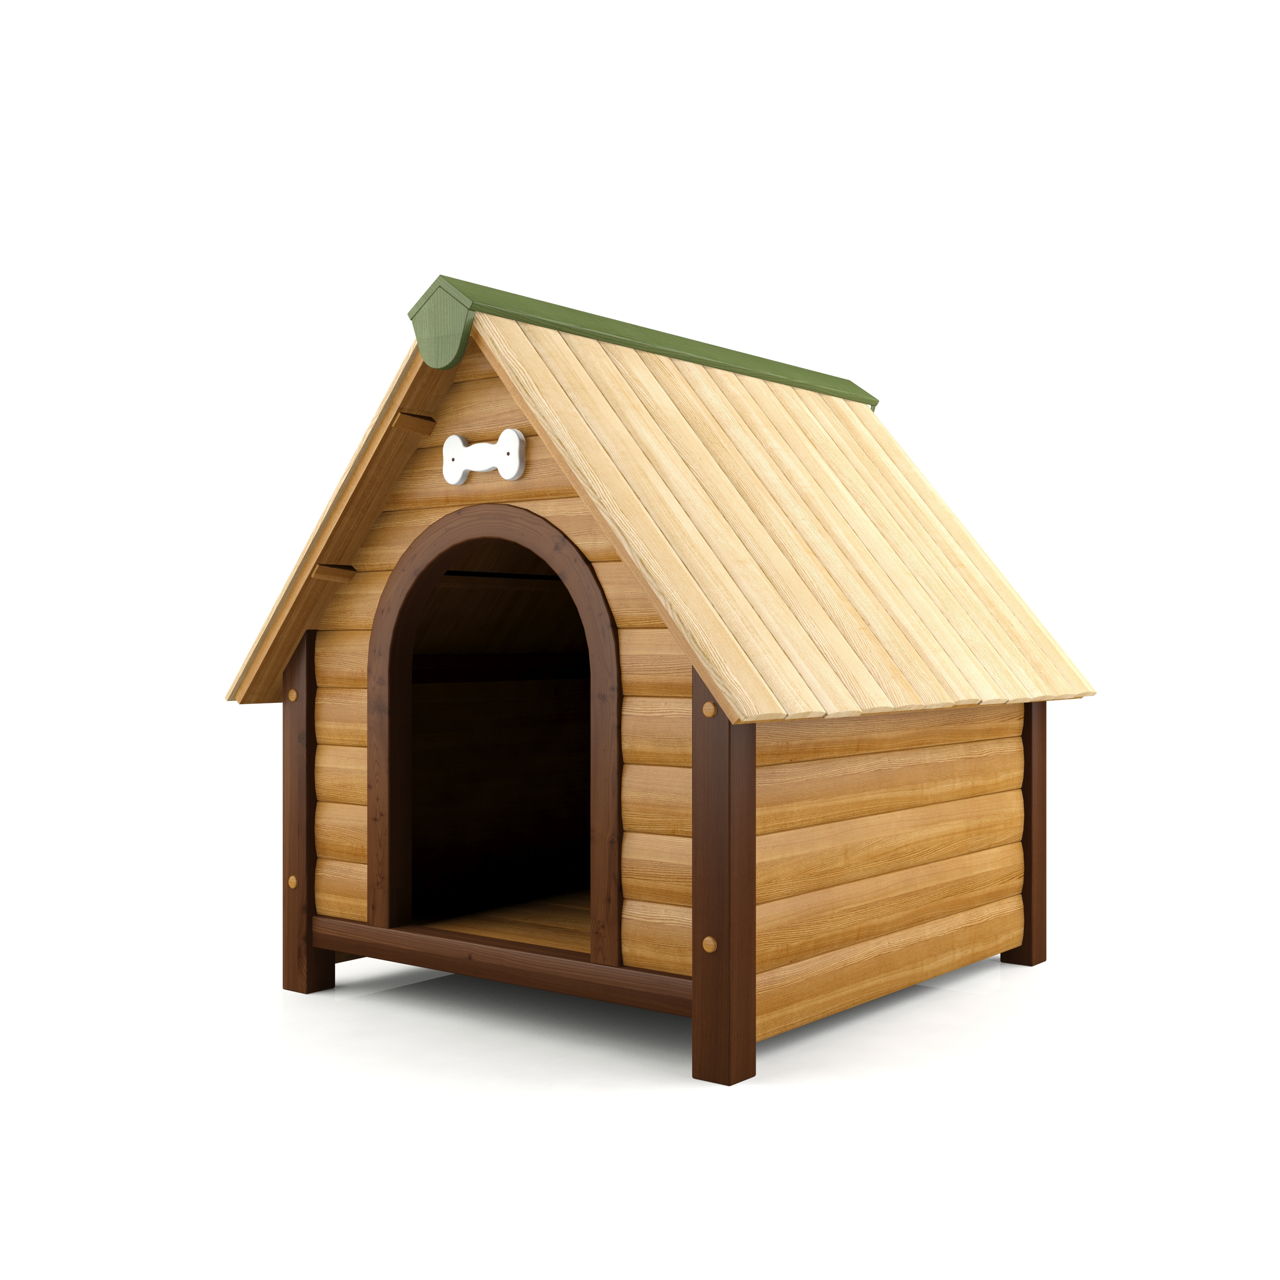 A Visual Guide on How to Build a Dog House in 8 Simple ...